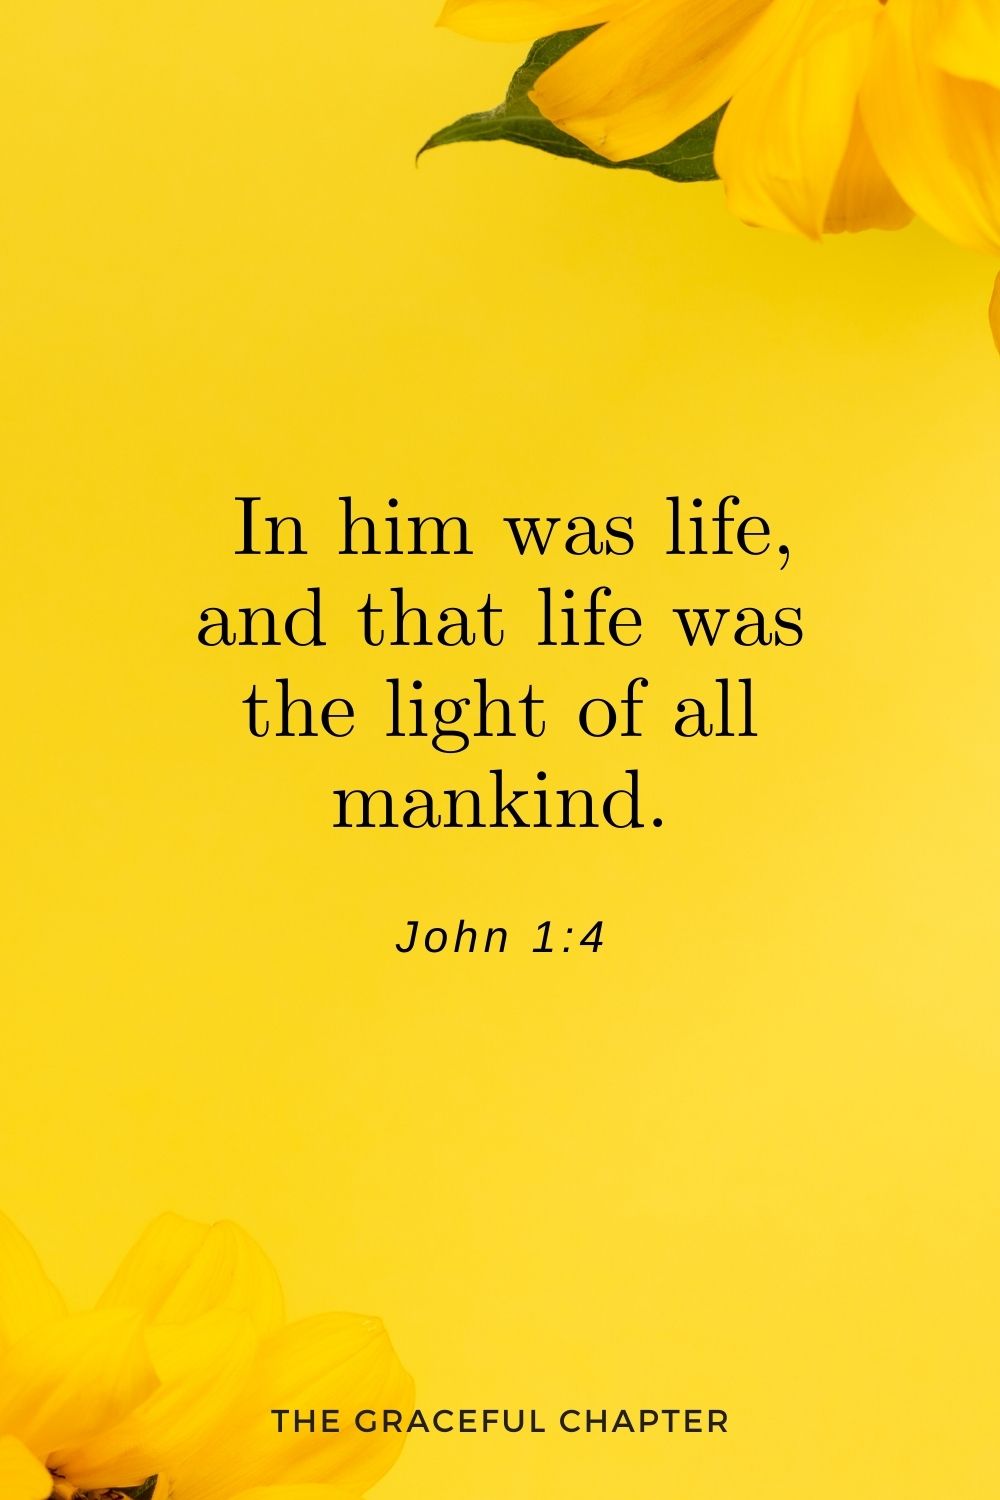  In him was life, and that life was the light of all mankind. John 1:4